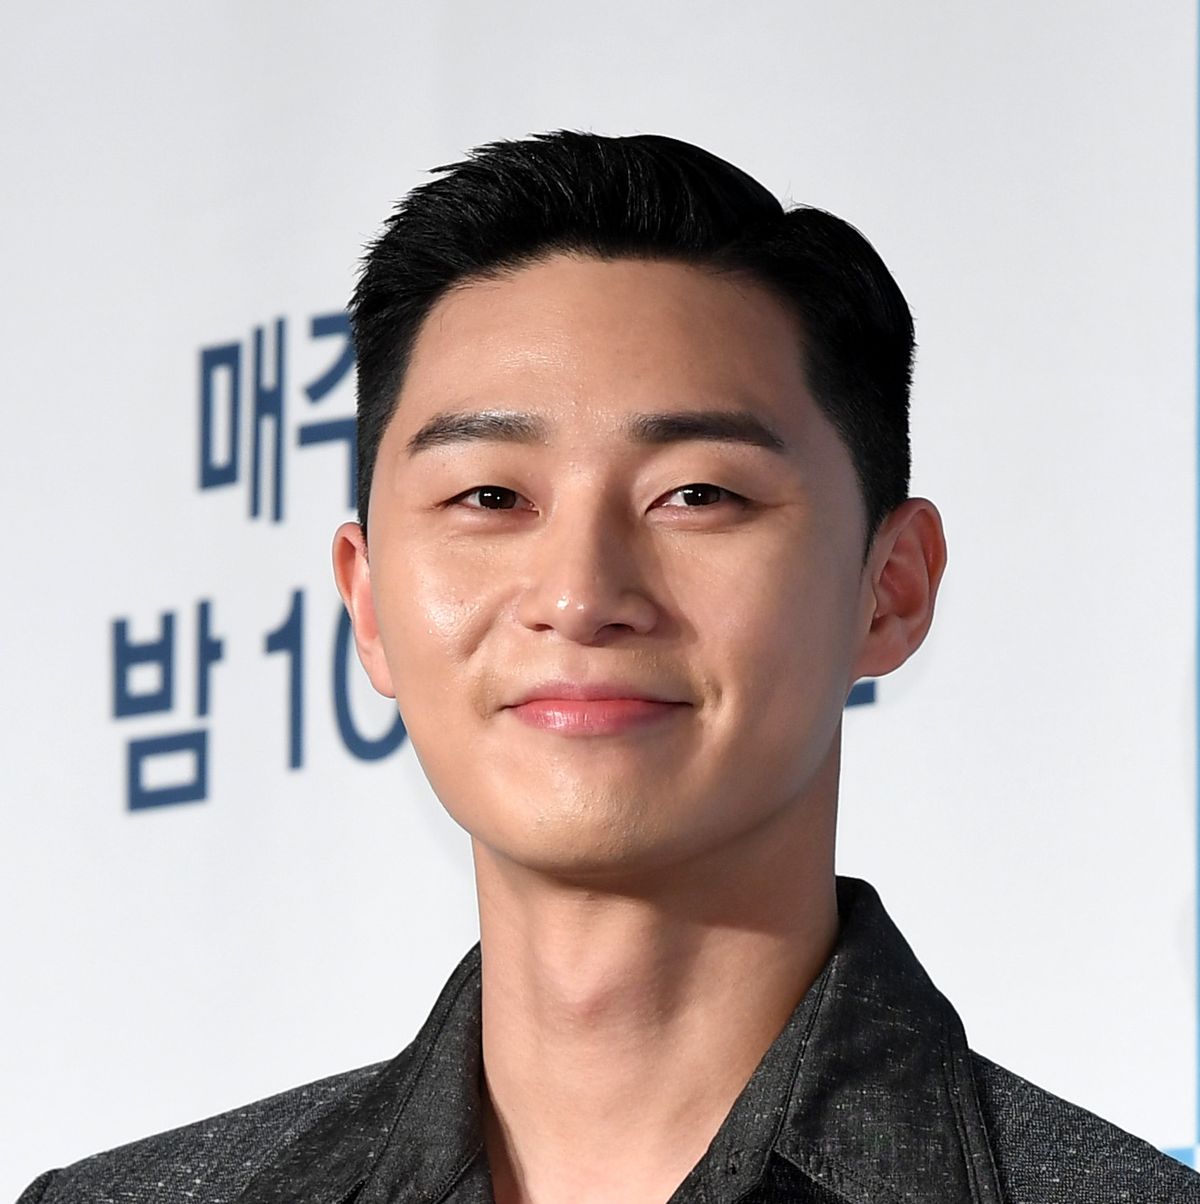 Park Seo Joon Shares His Thoughts About Taking On New Roles And